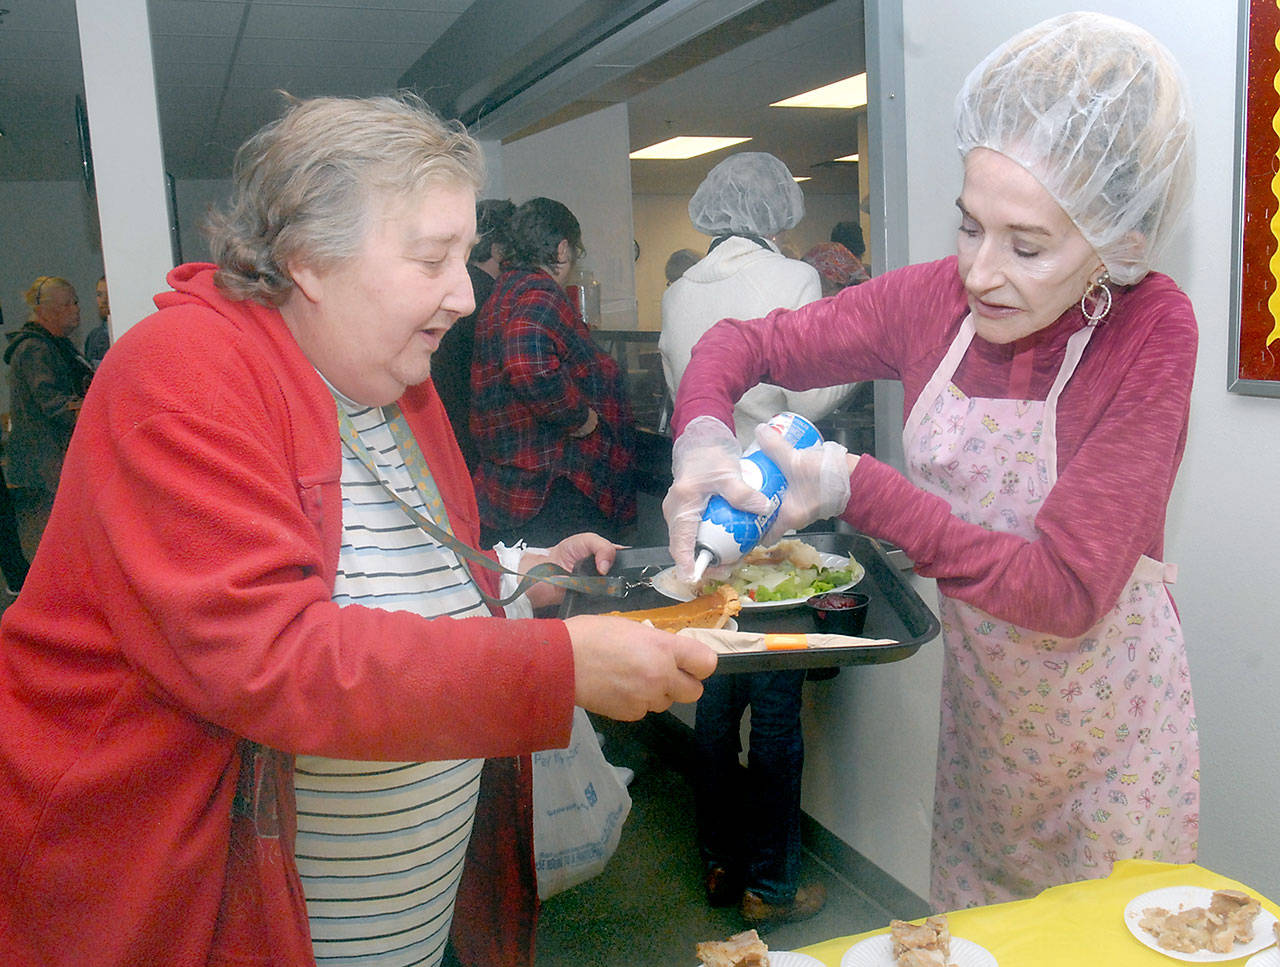 Christine Taylor of Port Angeles, left, watches as Ann Powers of Joyce adds whipped cream to a piece of pumpkin pie during Wednesday’s community lunch at the Salvation Army’s center in Port Angeles. Organizers expected about 200 people to take part in the free meal on the day before Thanksgiving. (Keith Thorpe/Peninsula Daily News)